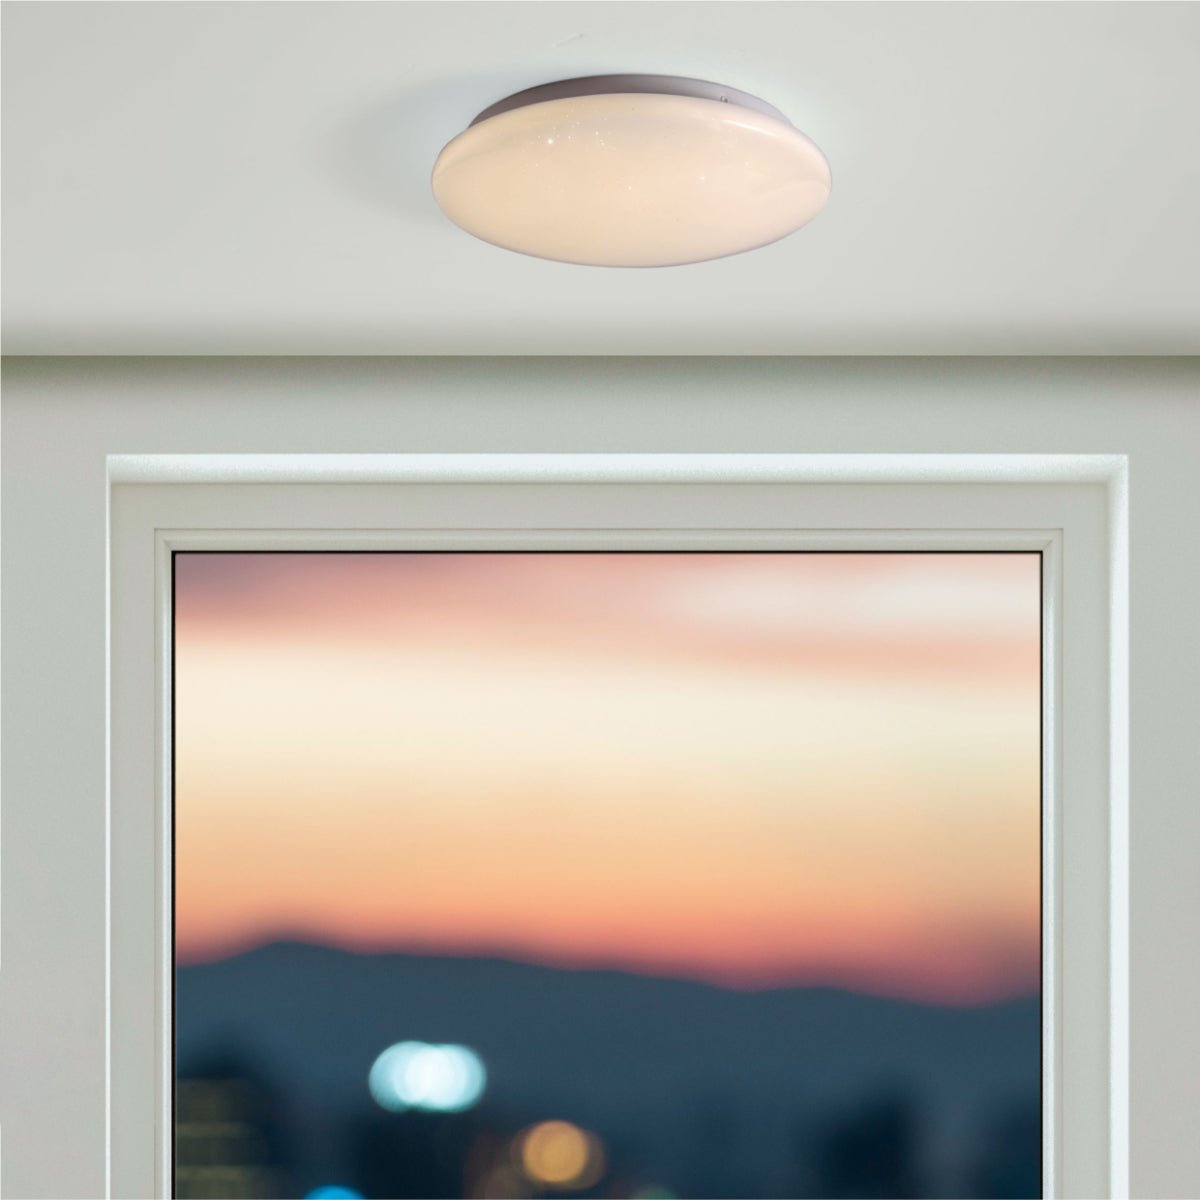 Indoor usage of Moonlight Flush Ceiling Light 18W Warm White Cool White Cool Daylight 1440LM IP20 non-yellowing PMMA Cover | TEKLED 121-03986